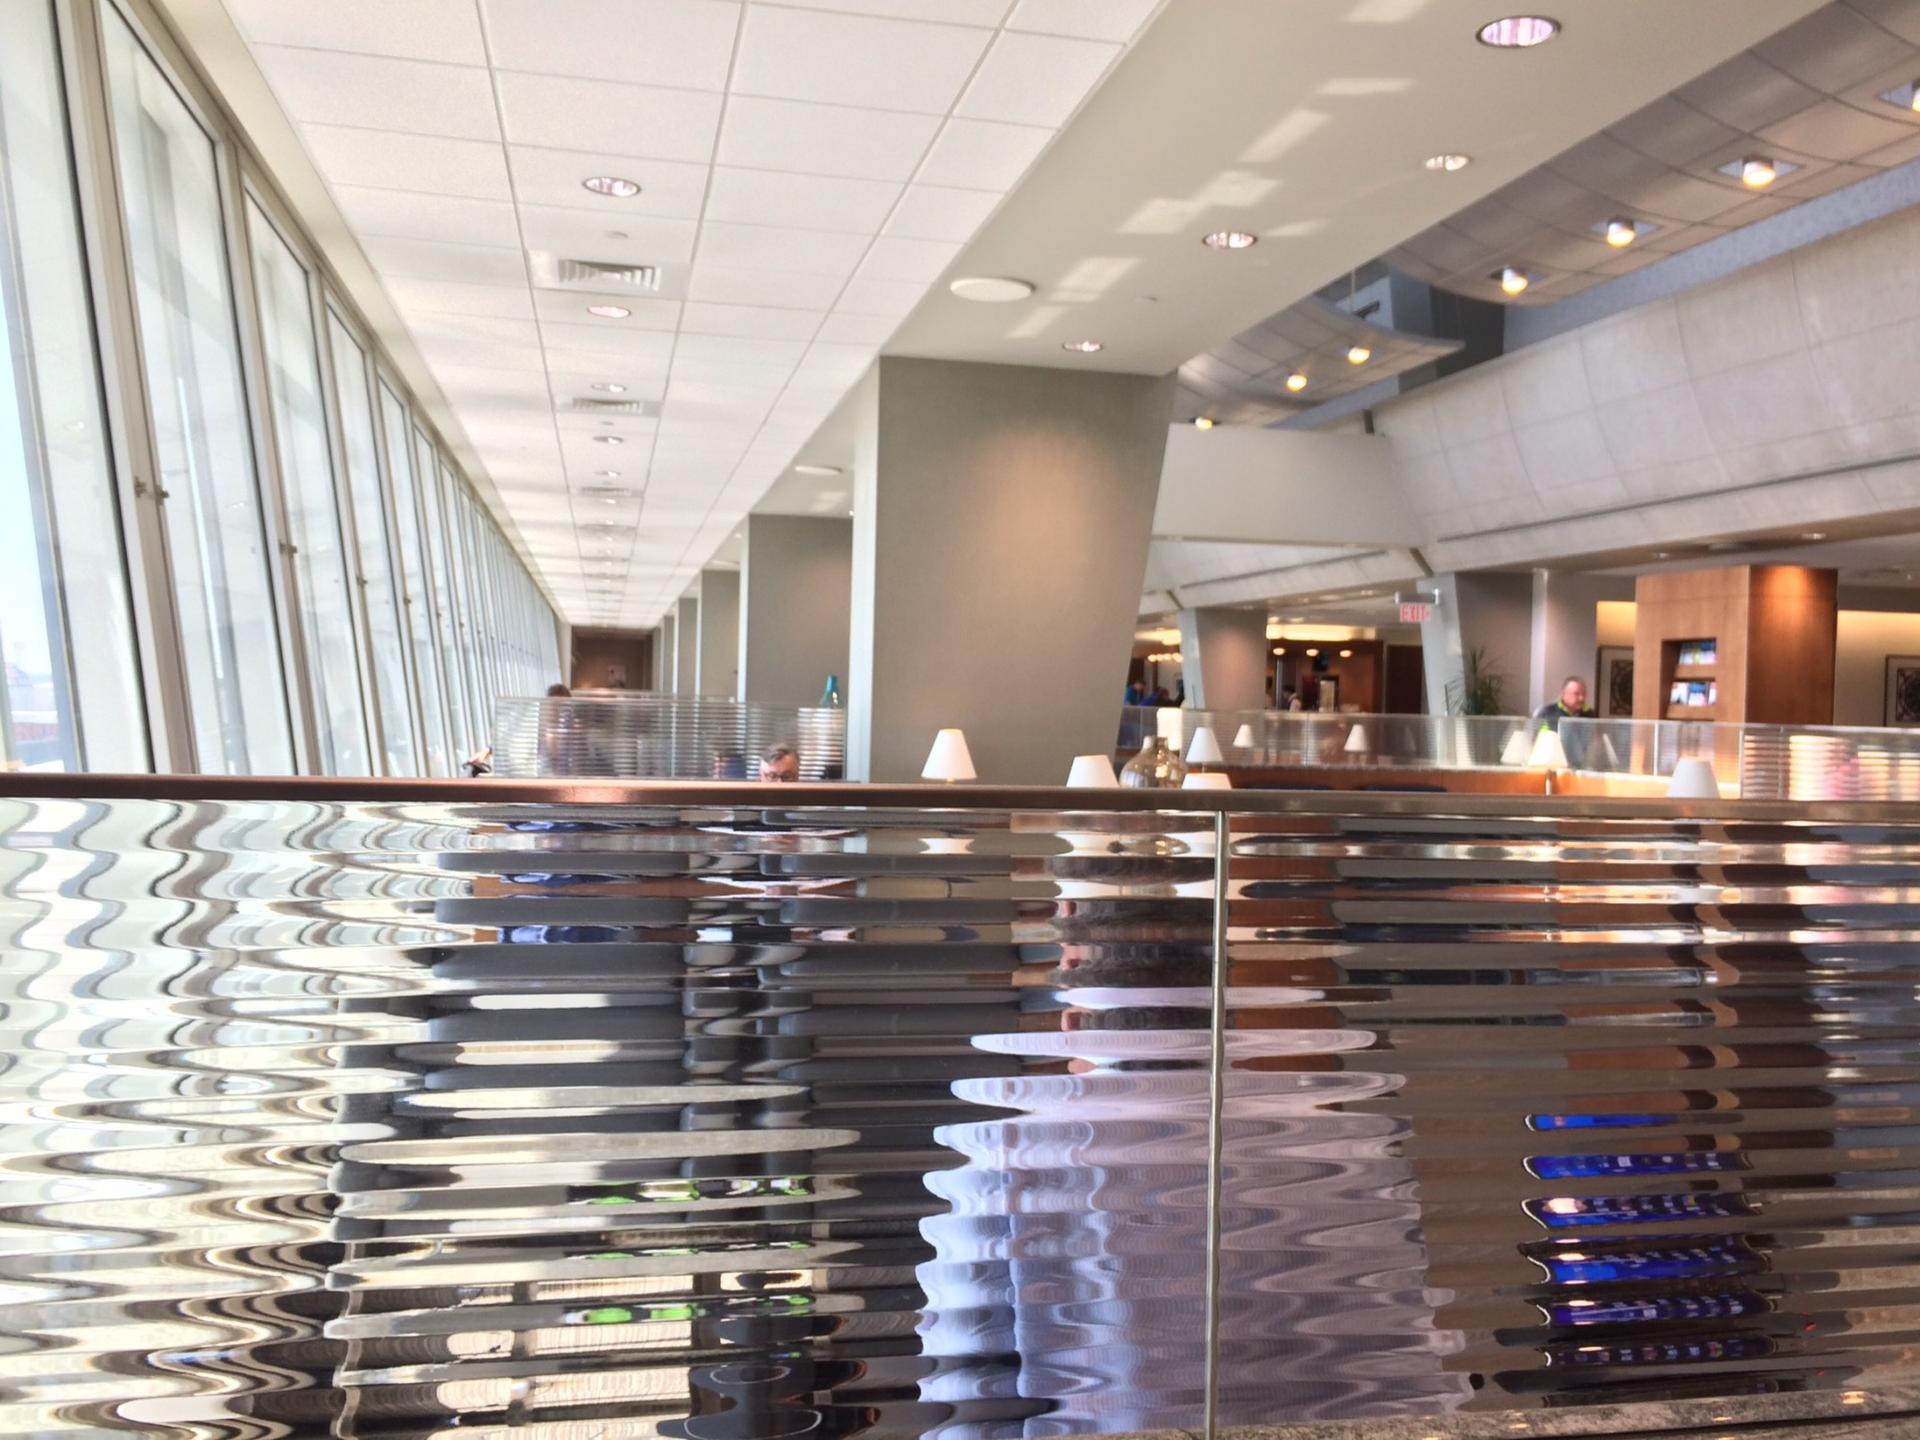 American Airlines Admirals Club image 24 of 48